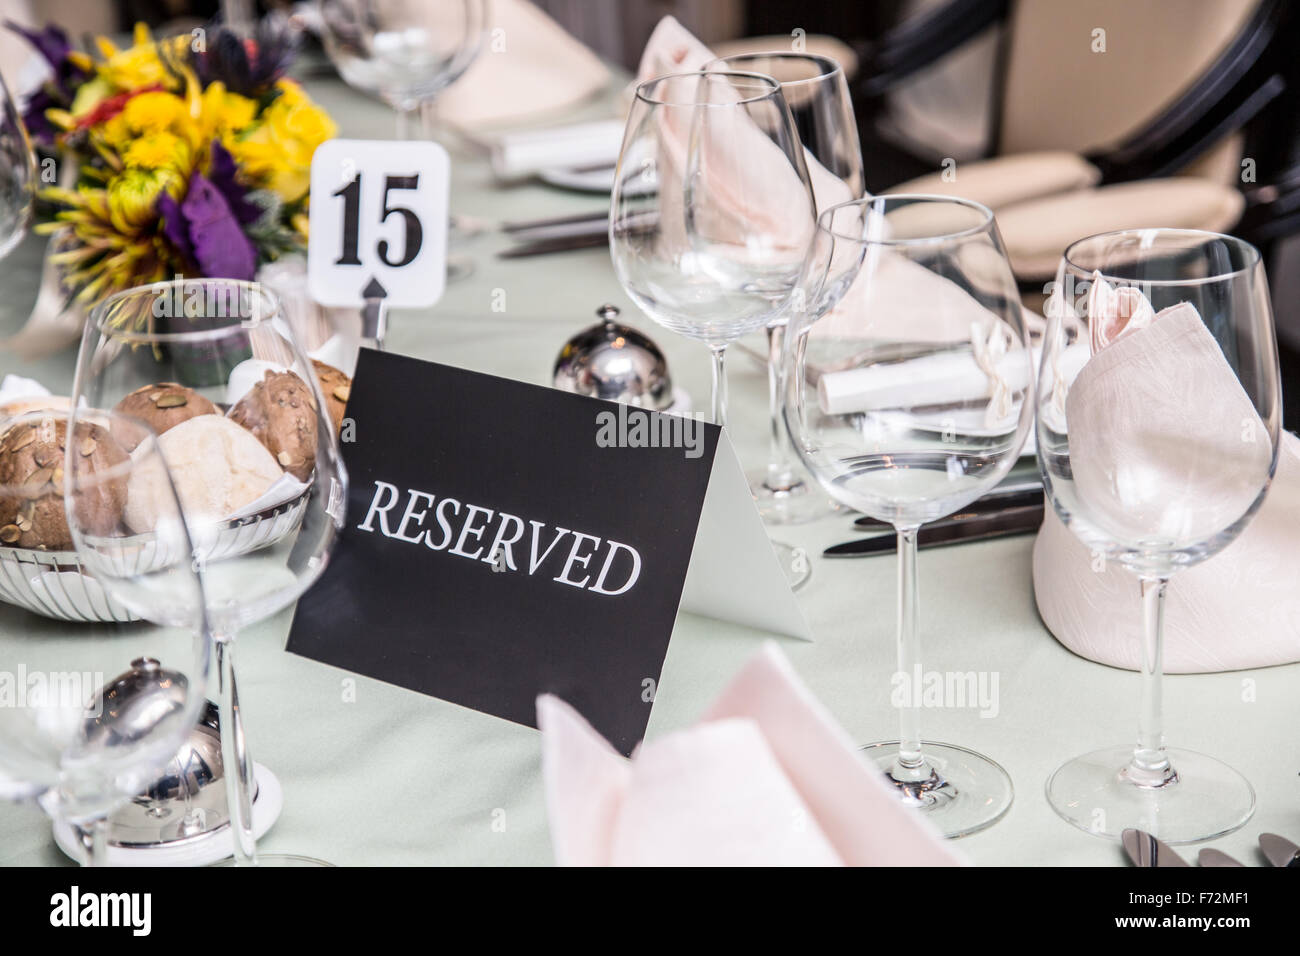 Festival dinner setting and 'Reserved' sign. Stock Photo